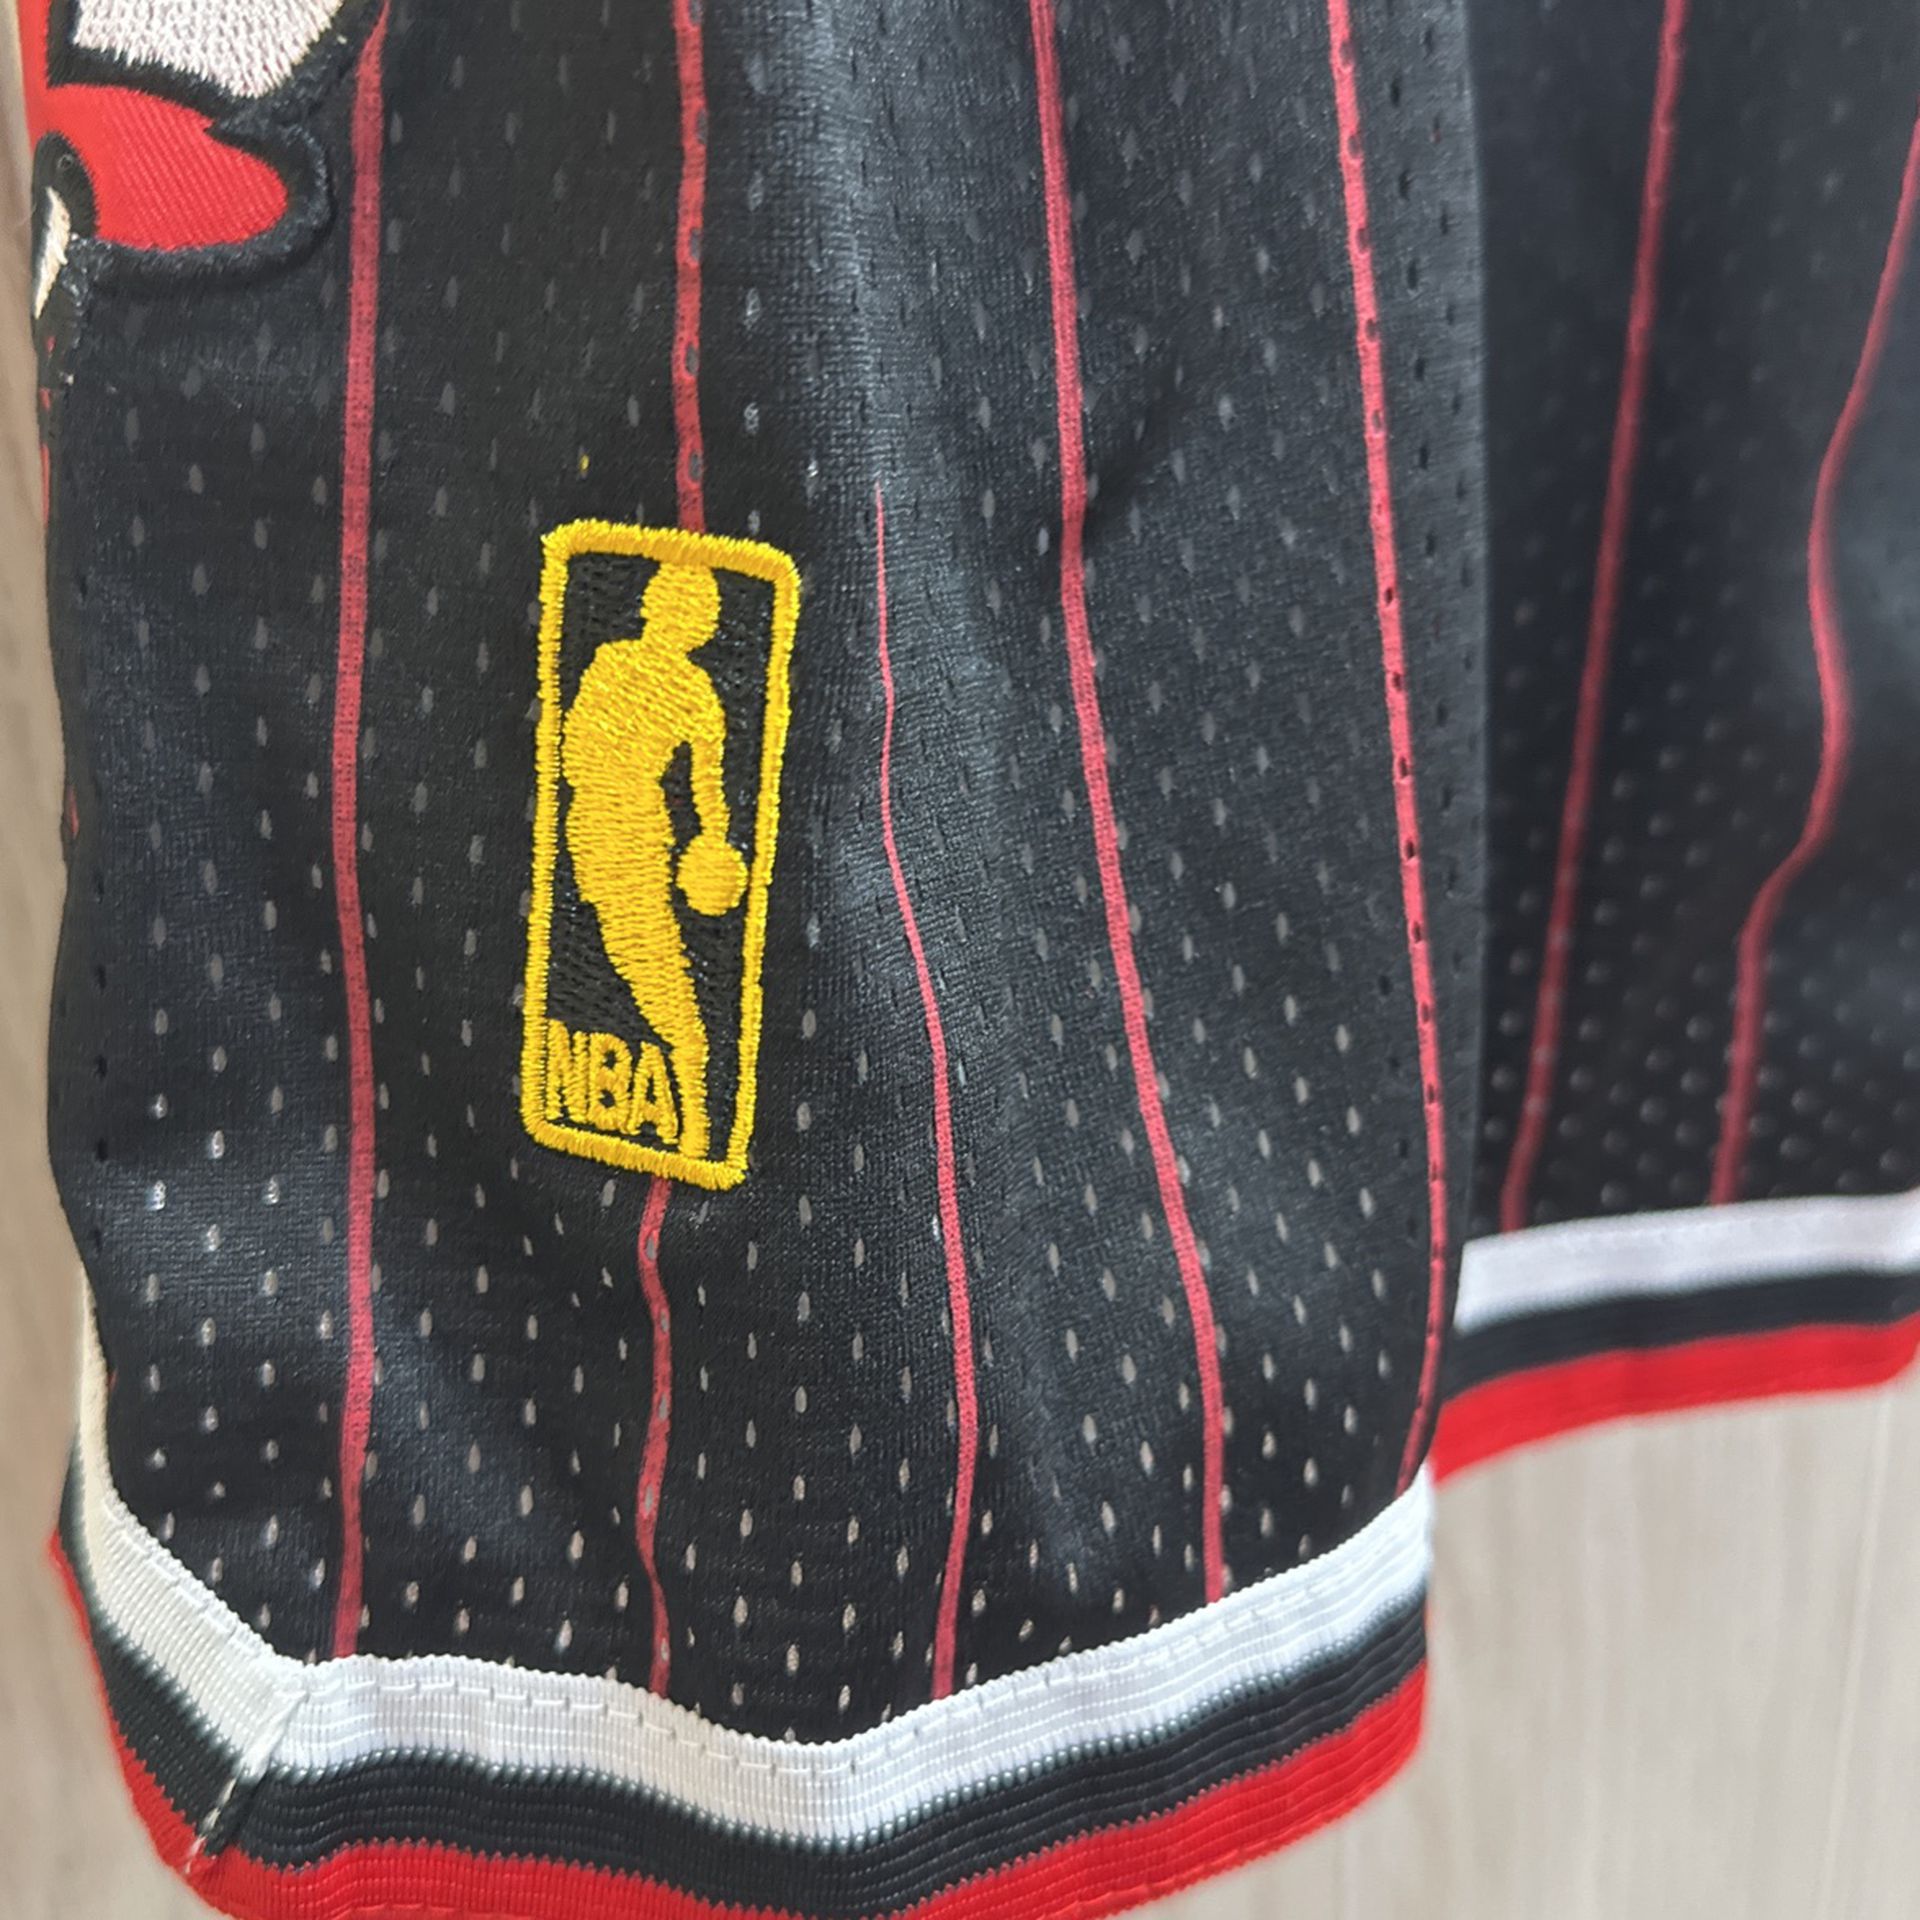 Chicago Bulls Nba Shorts Pinstripe Black And Red Just Don Vintage Throwback  Hardwood Classics Stitched Size S for Sale in Jacksonville, FL - OfferUp